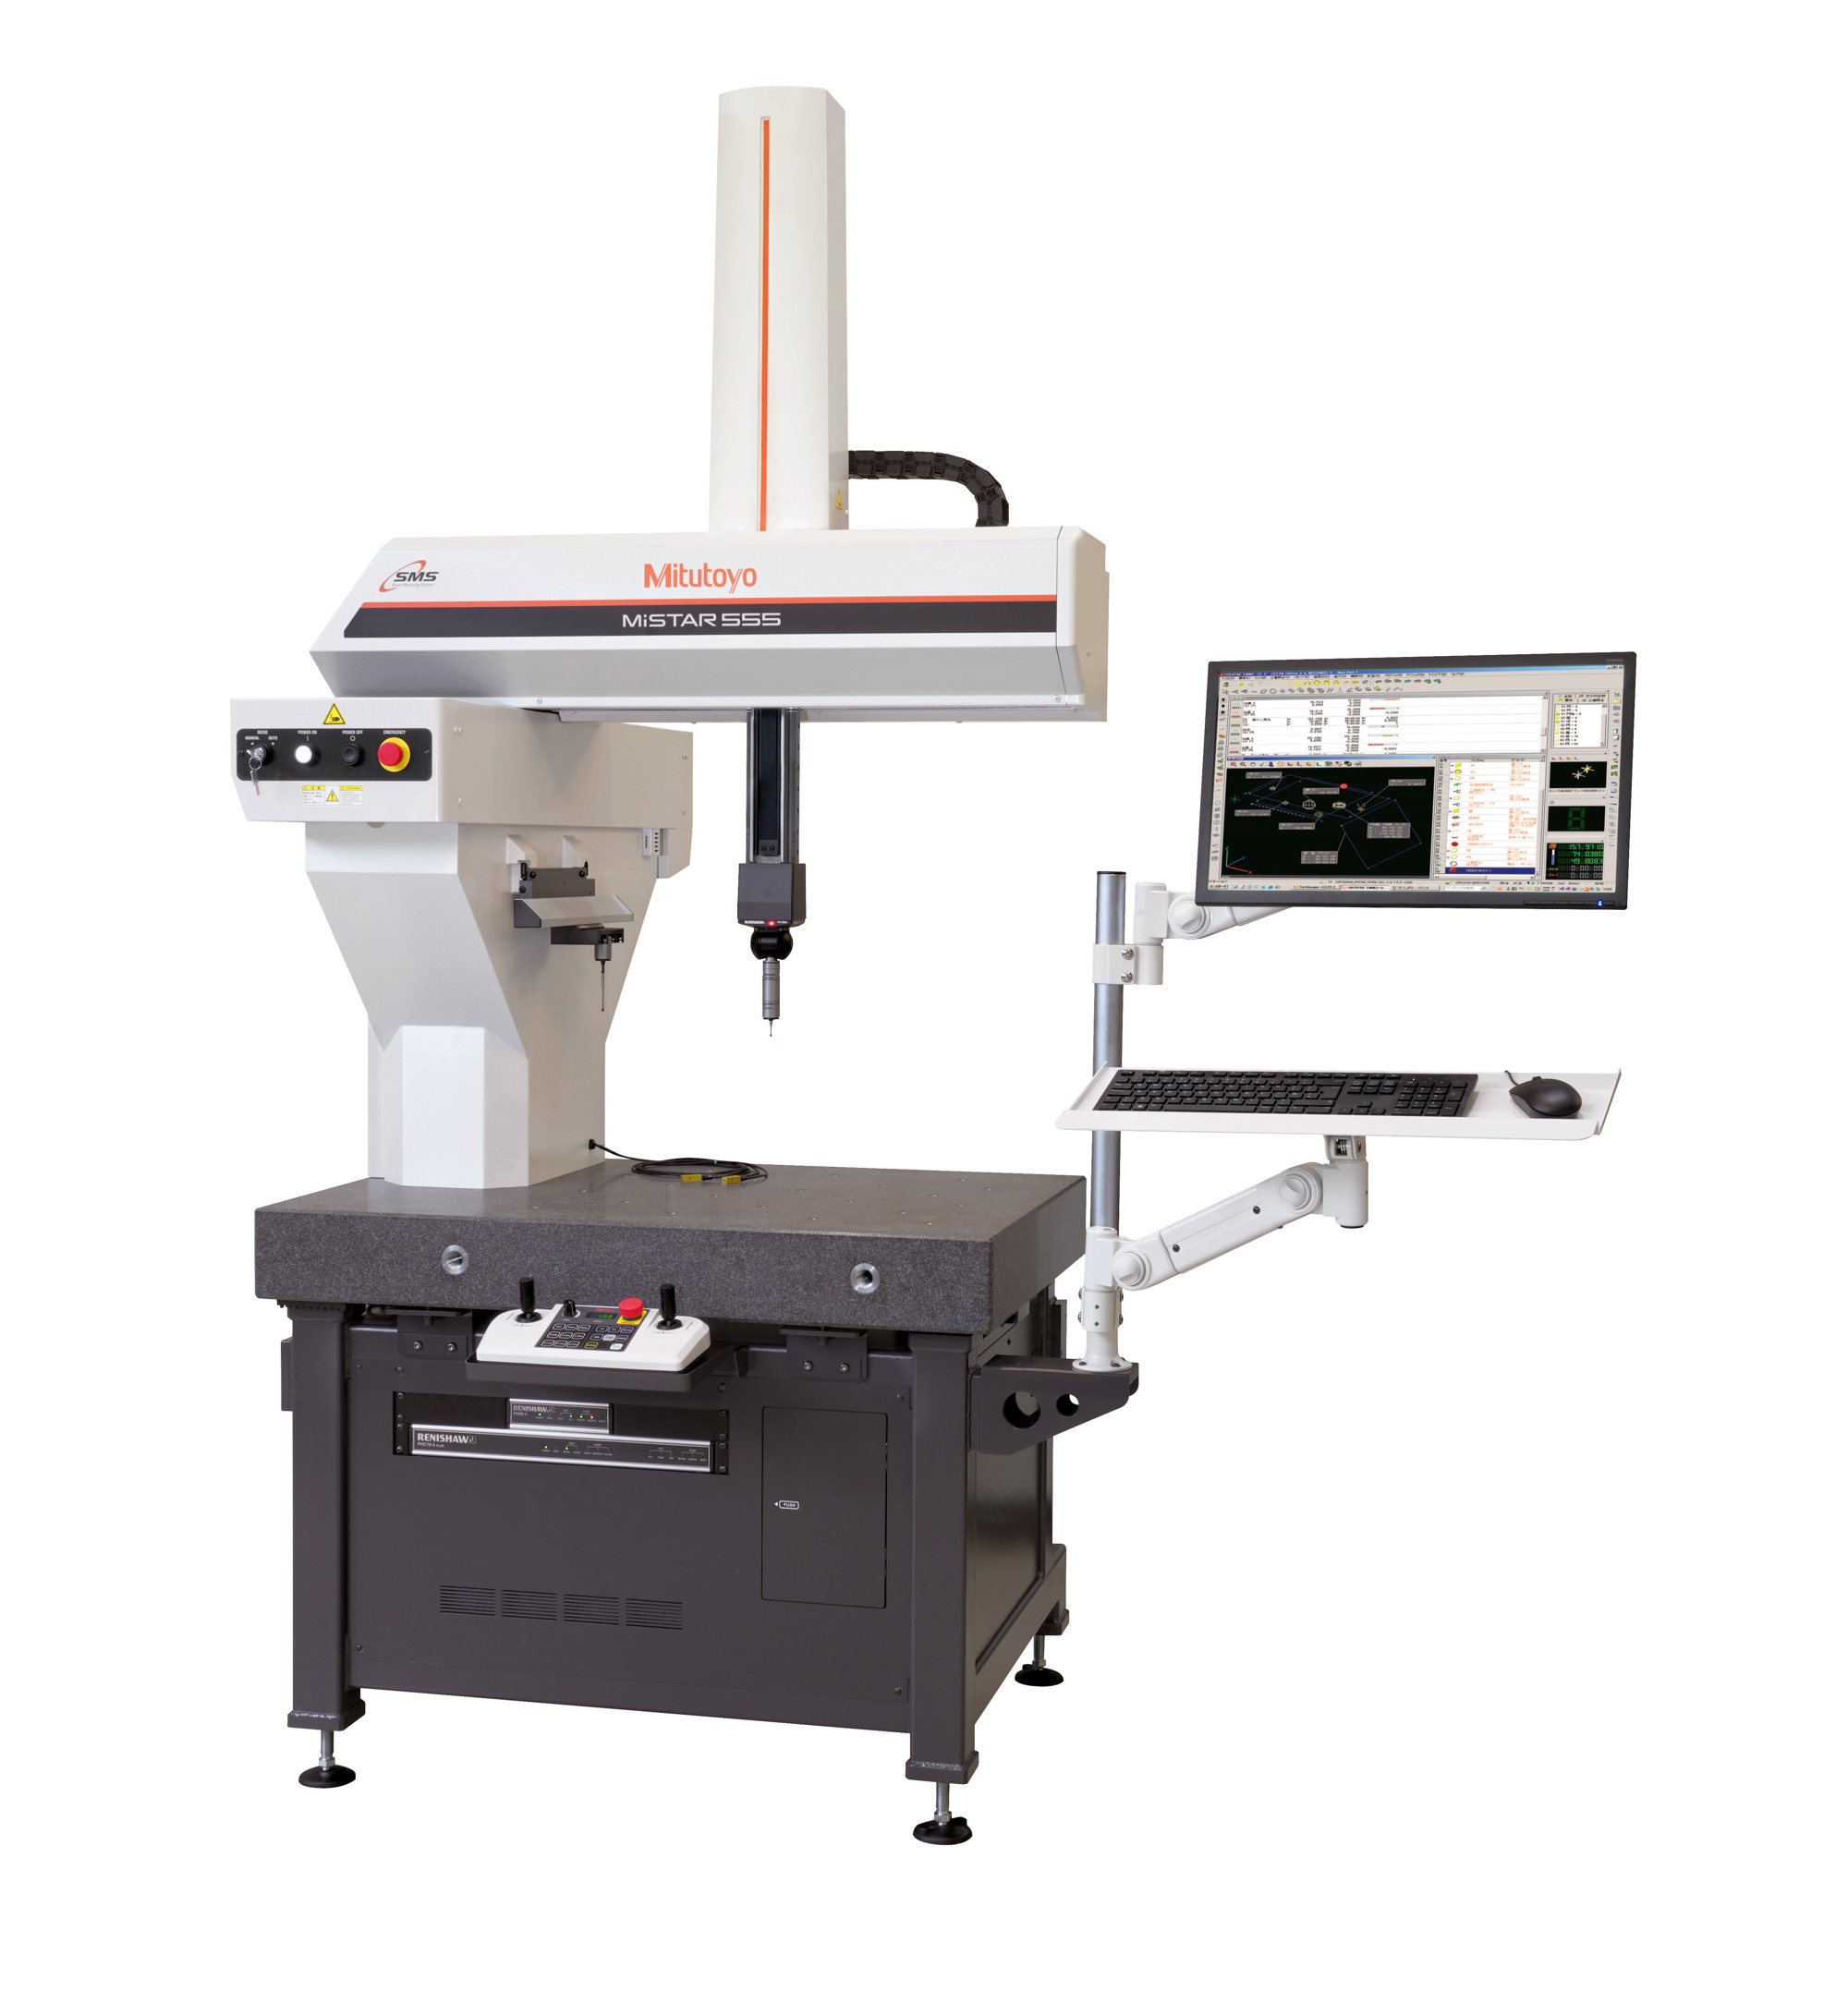 This image shows a Cantilever type of CMM Machine